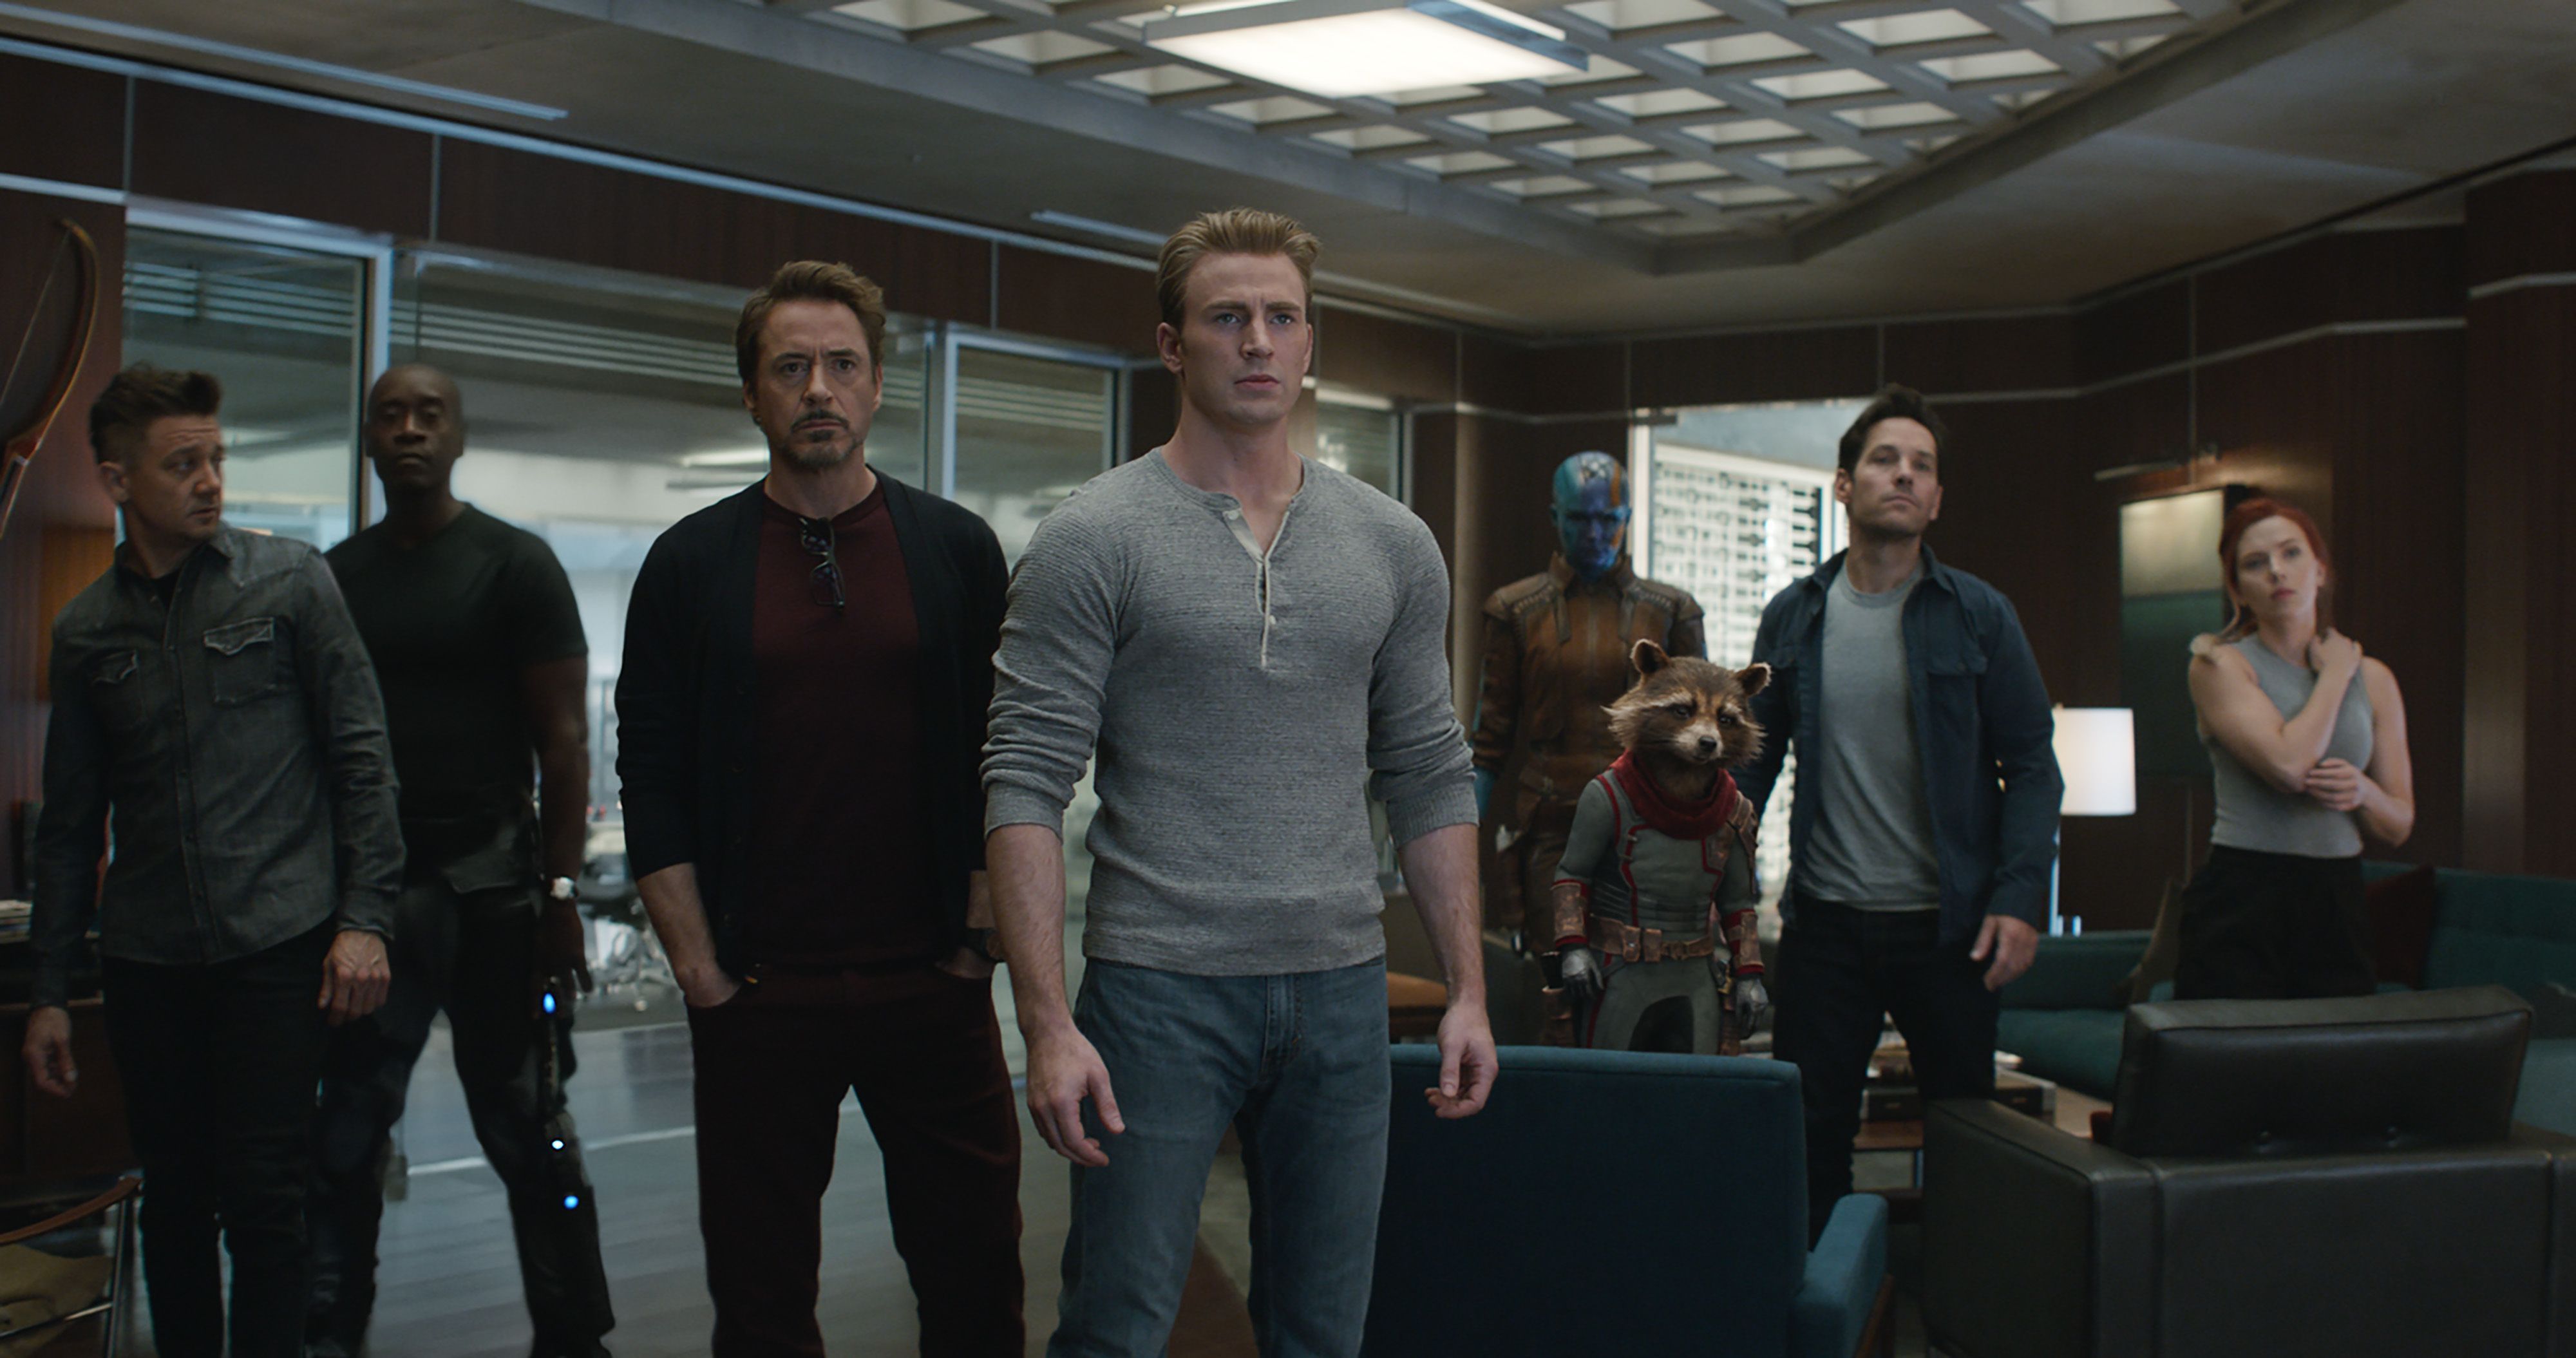 Does Thor Know What Money Is? Is The Hulk Basically Broke? Here's a Ranking of How Rich the Super Heroes in 'Avengers: Endgame' Are